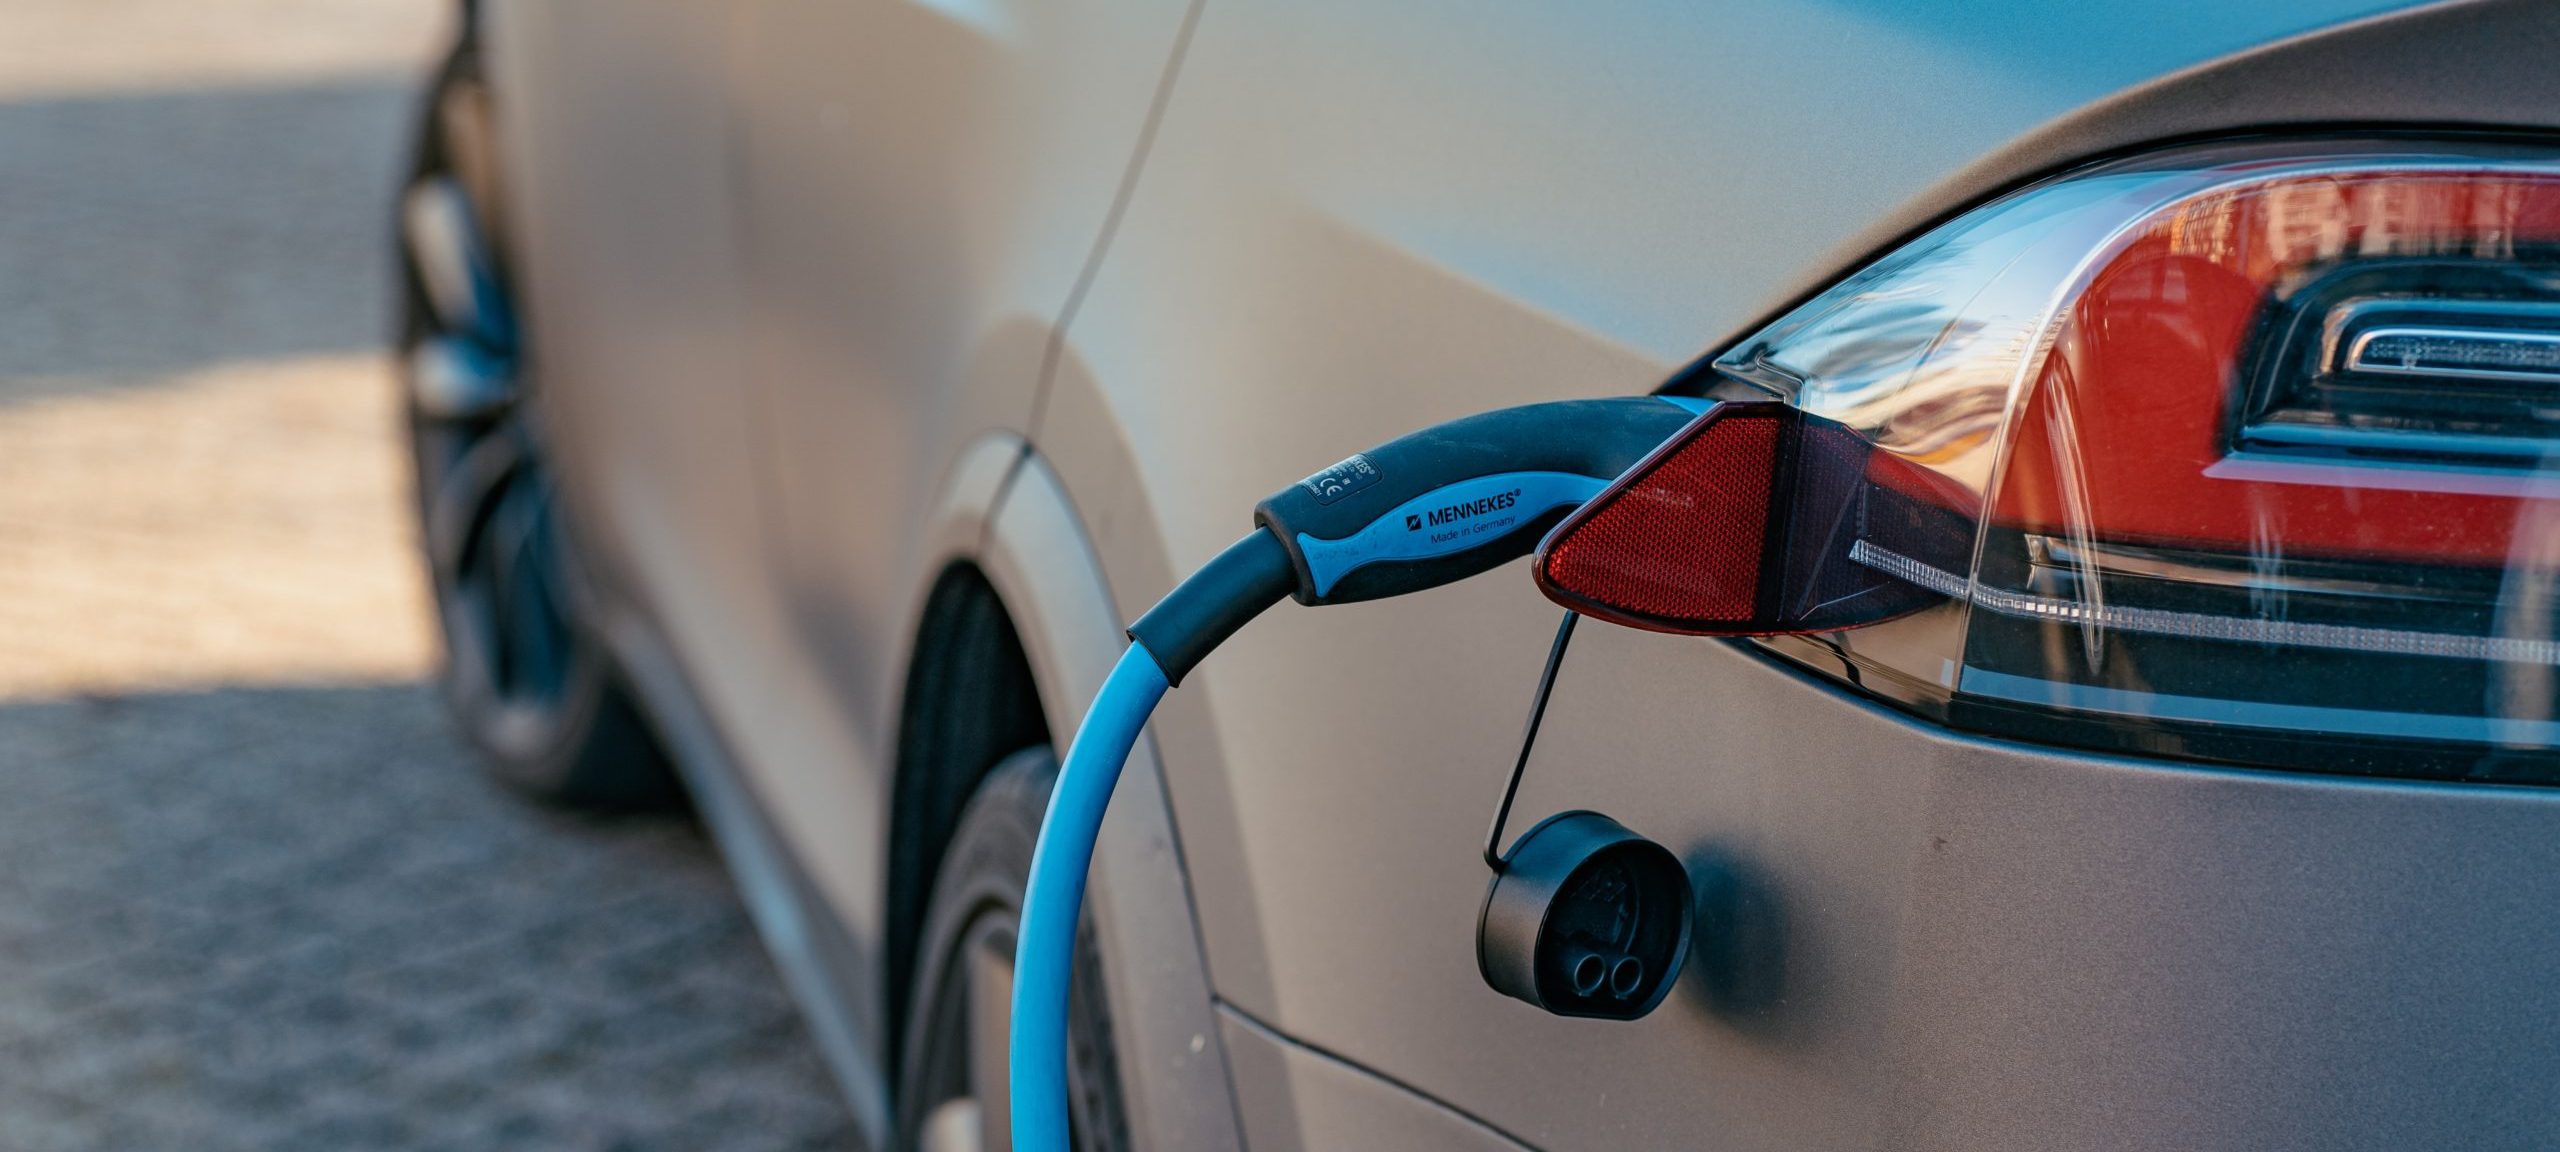 Maine’s electric vehicle rebate program expands The SunriseGuide